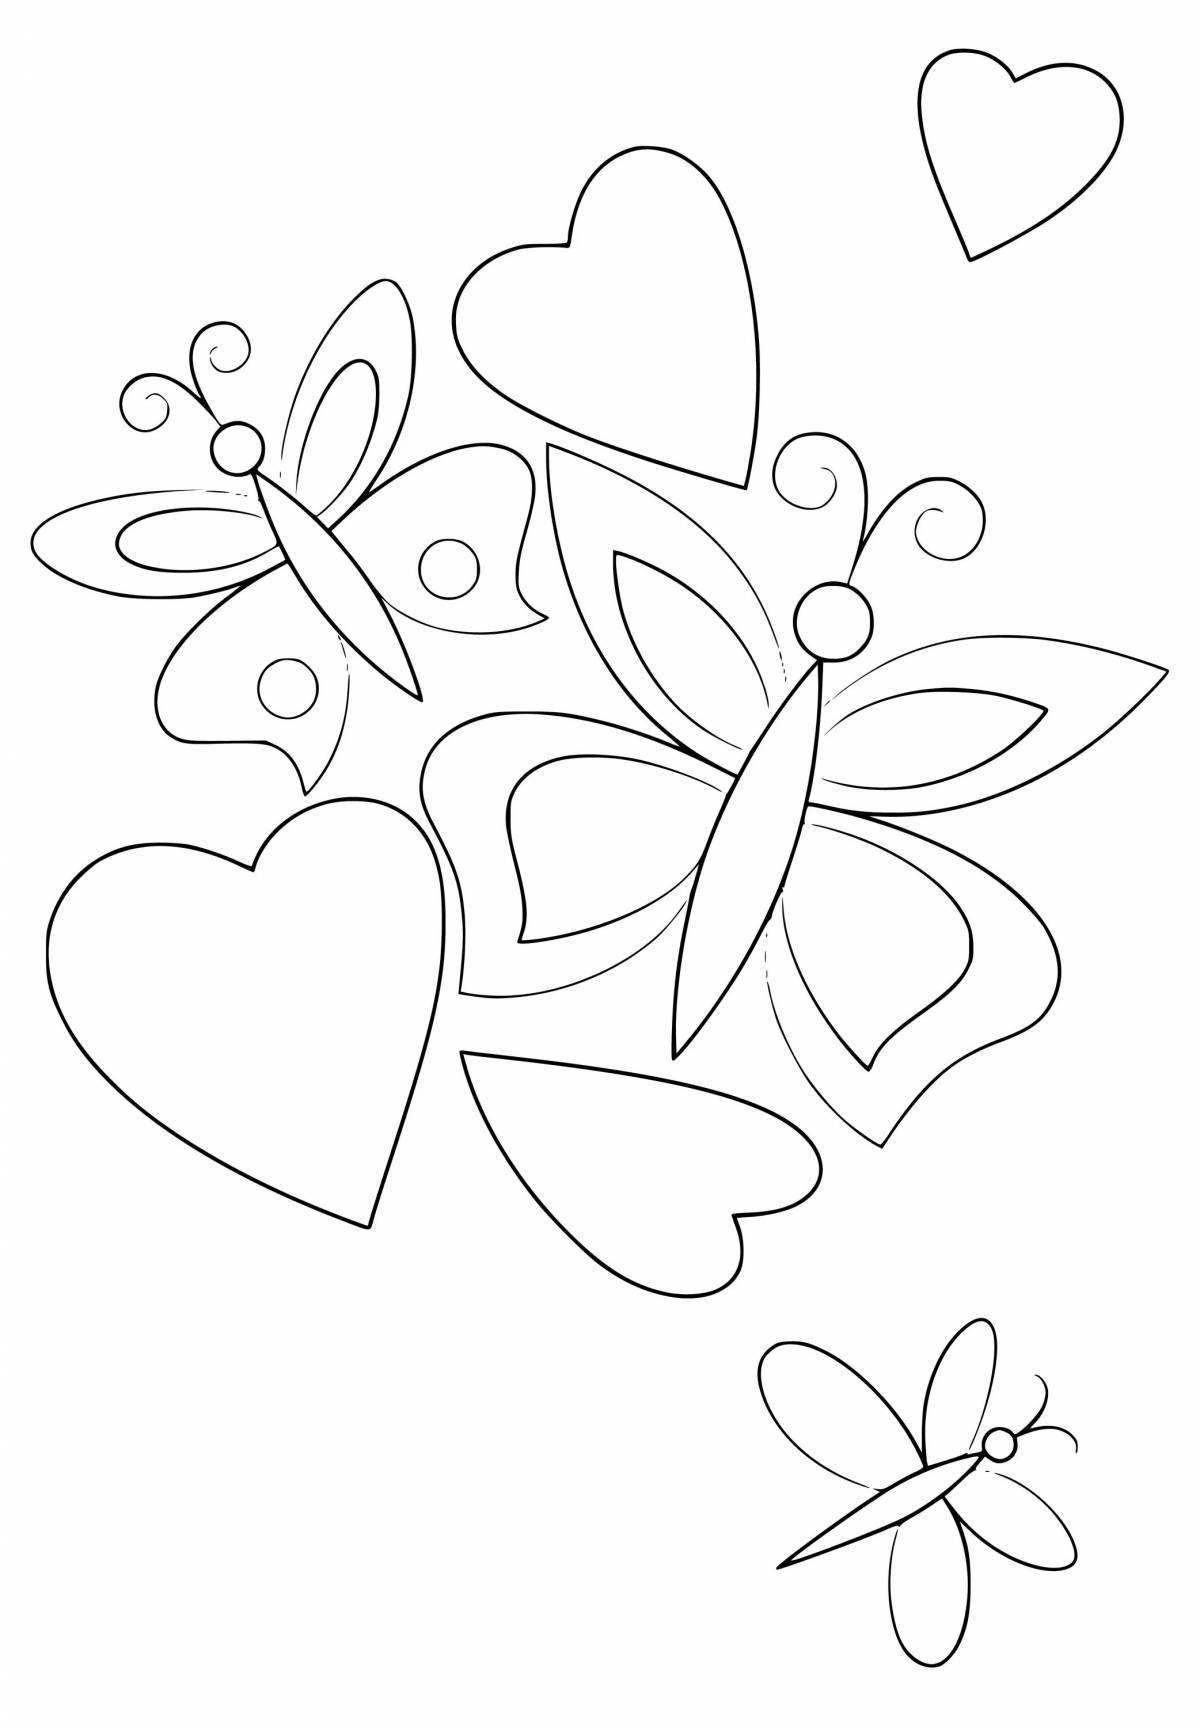 Bright heart and flower coloring